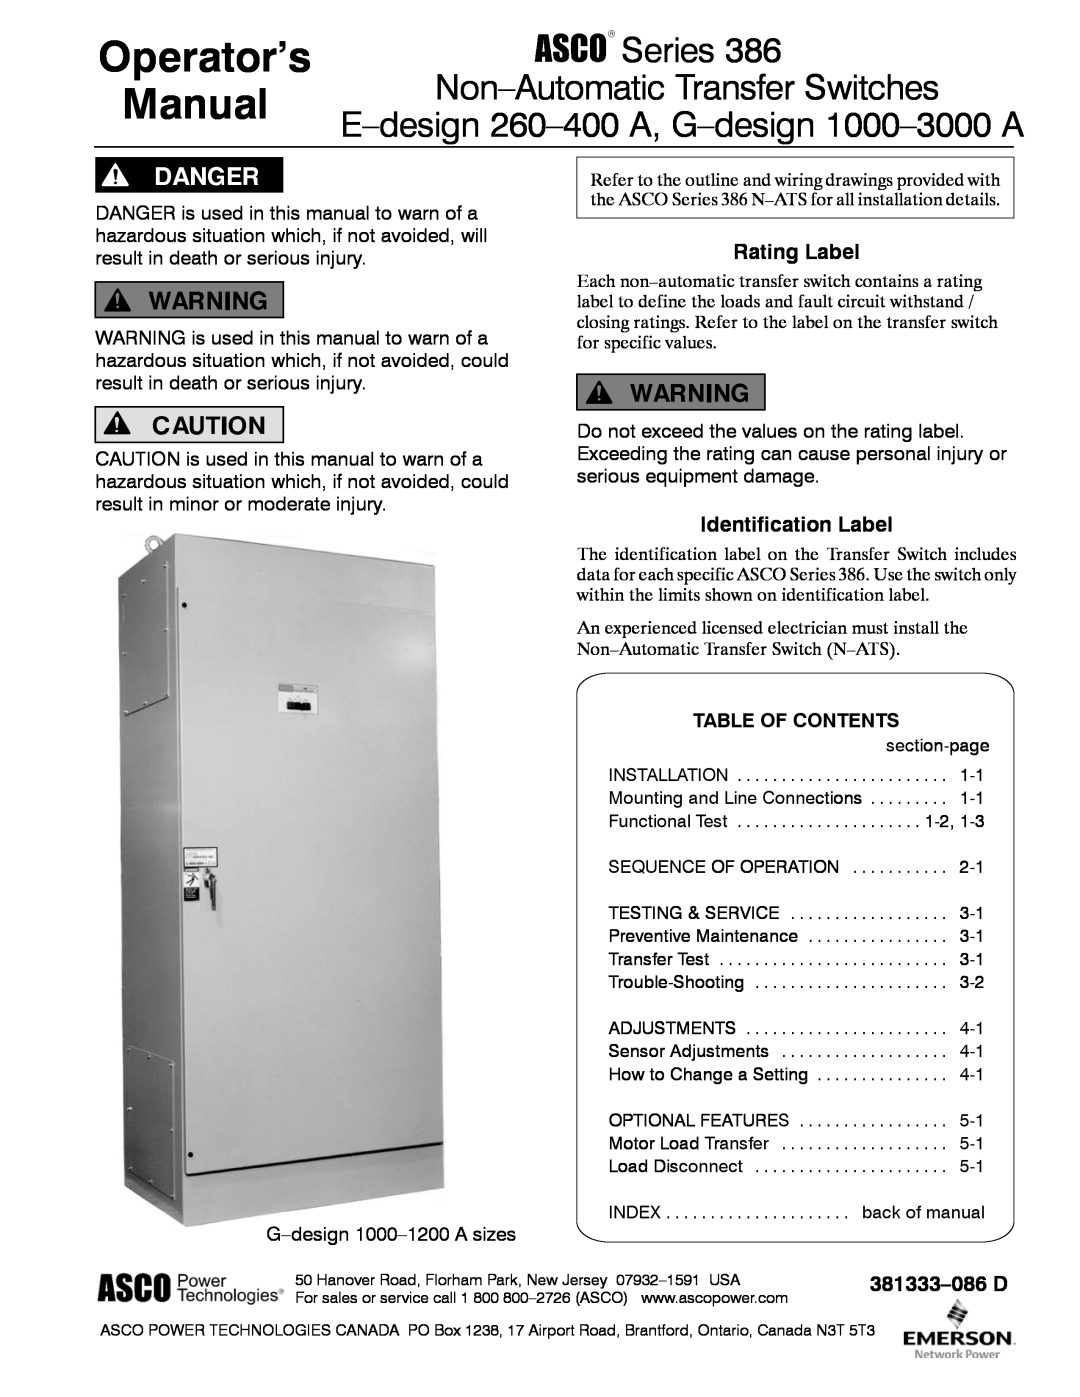 Emerson 386 manual Rating Label, Identification Label, Table Of Contents, 381333-086D, Operator’s Manual 